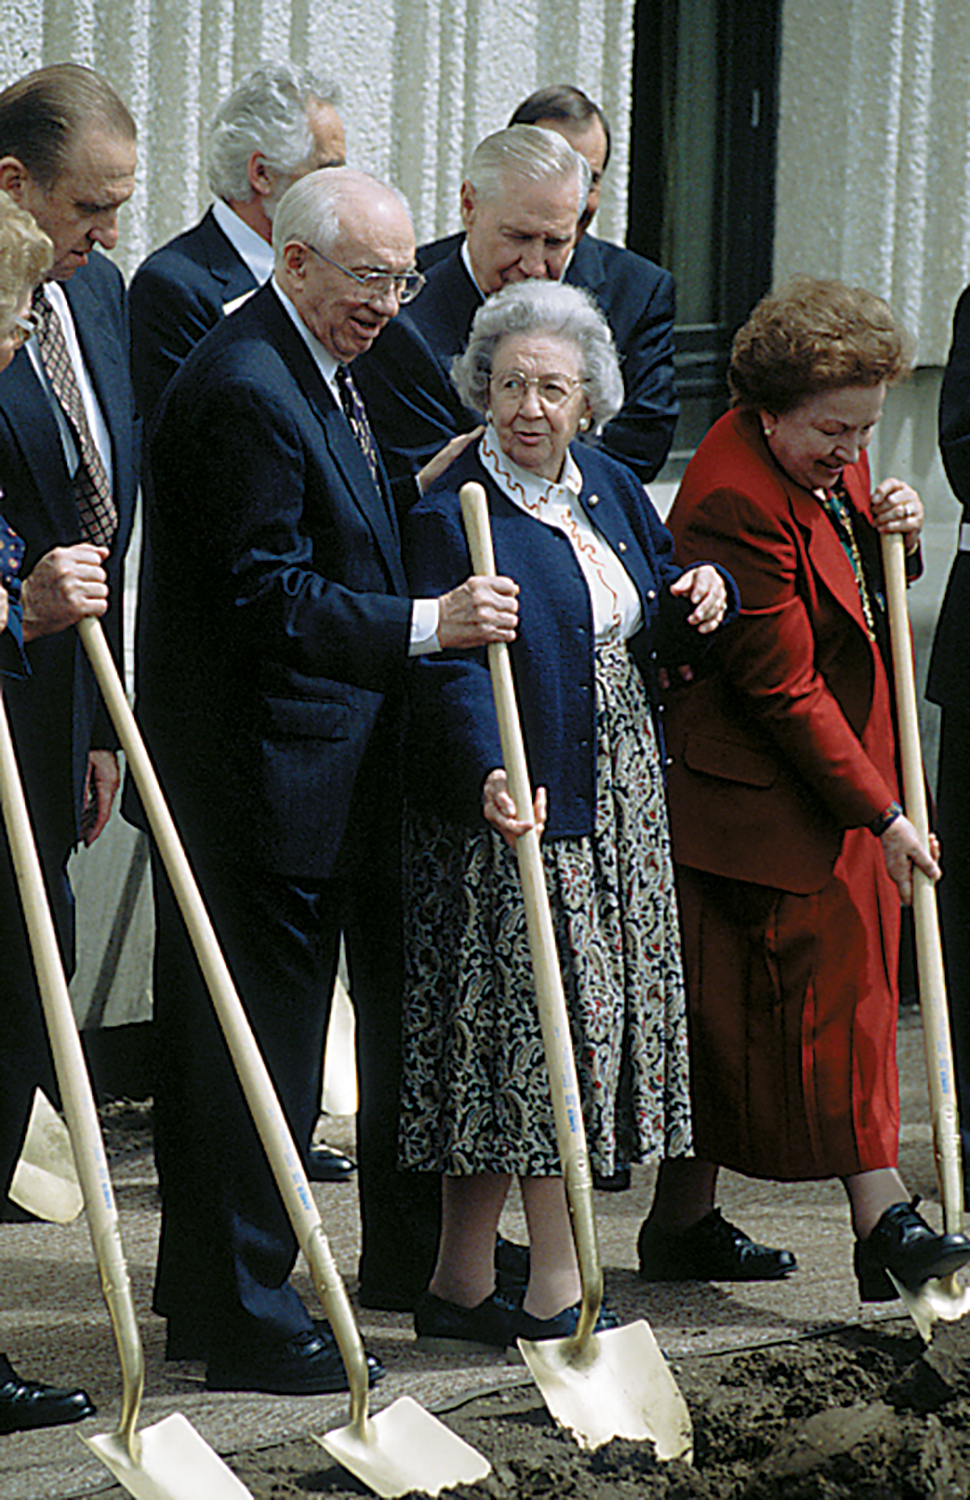 Thomas S. Monson, Gordon B. Hinckley, and Majorie Pay Hinckley and others stand side by side holding their shovels in the dirt.